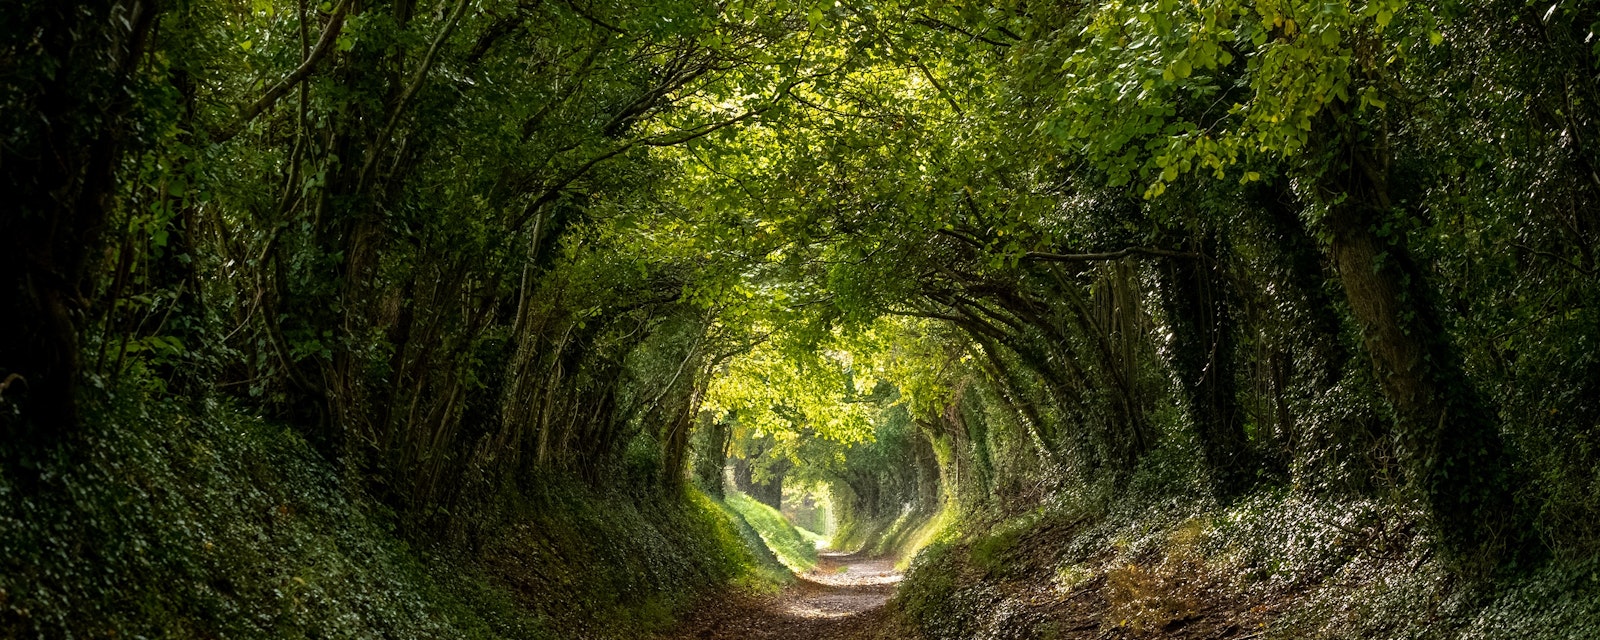 Light,At,The,End,Of,The,Tunnel.,Halnaker,Tree,Tunnel